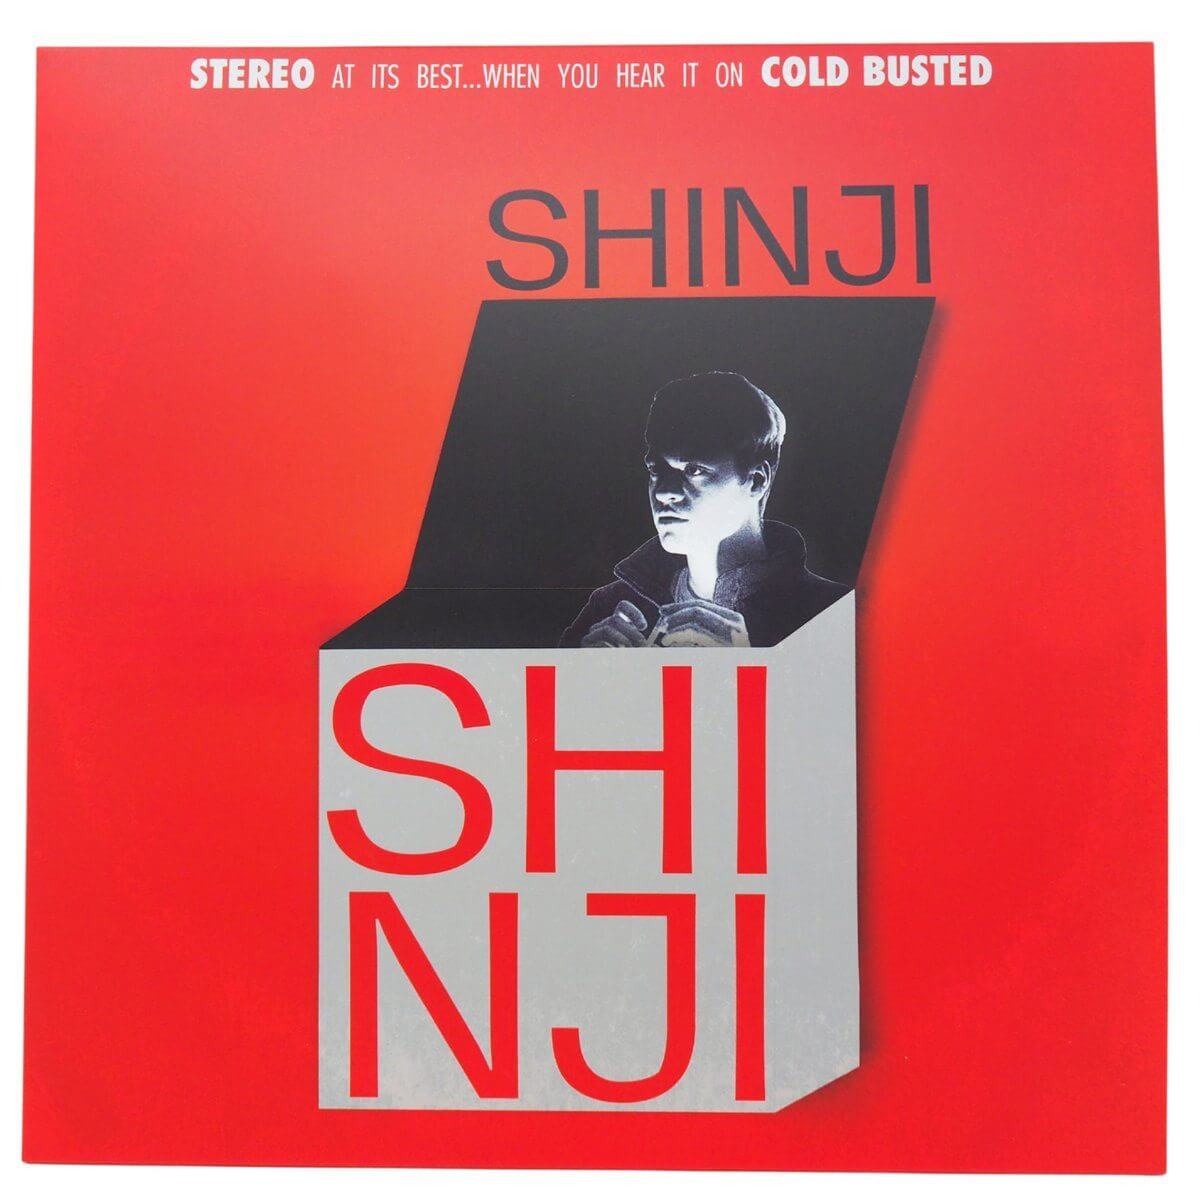 Shinji - Shinji - Limited Edition Solid Silver Colored 12 Inch Vinyl - Cold Busted